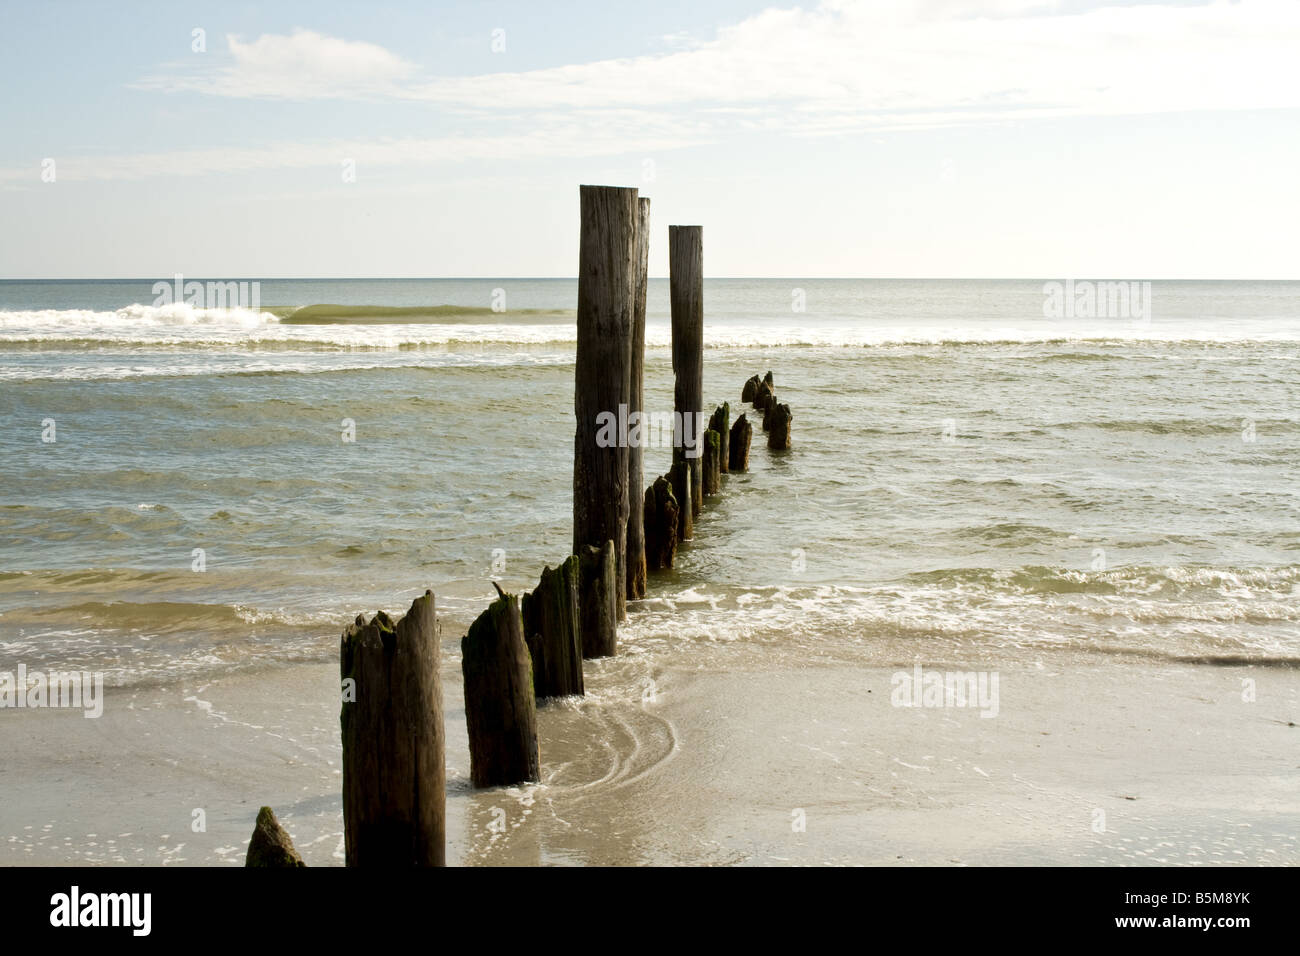 Old decaying wooden pilings leading into the ocean on a beach in Florida Stock Photo